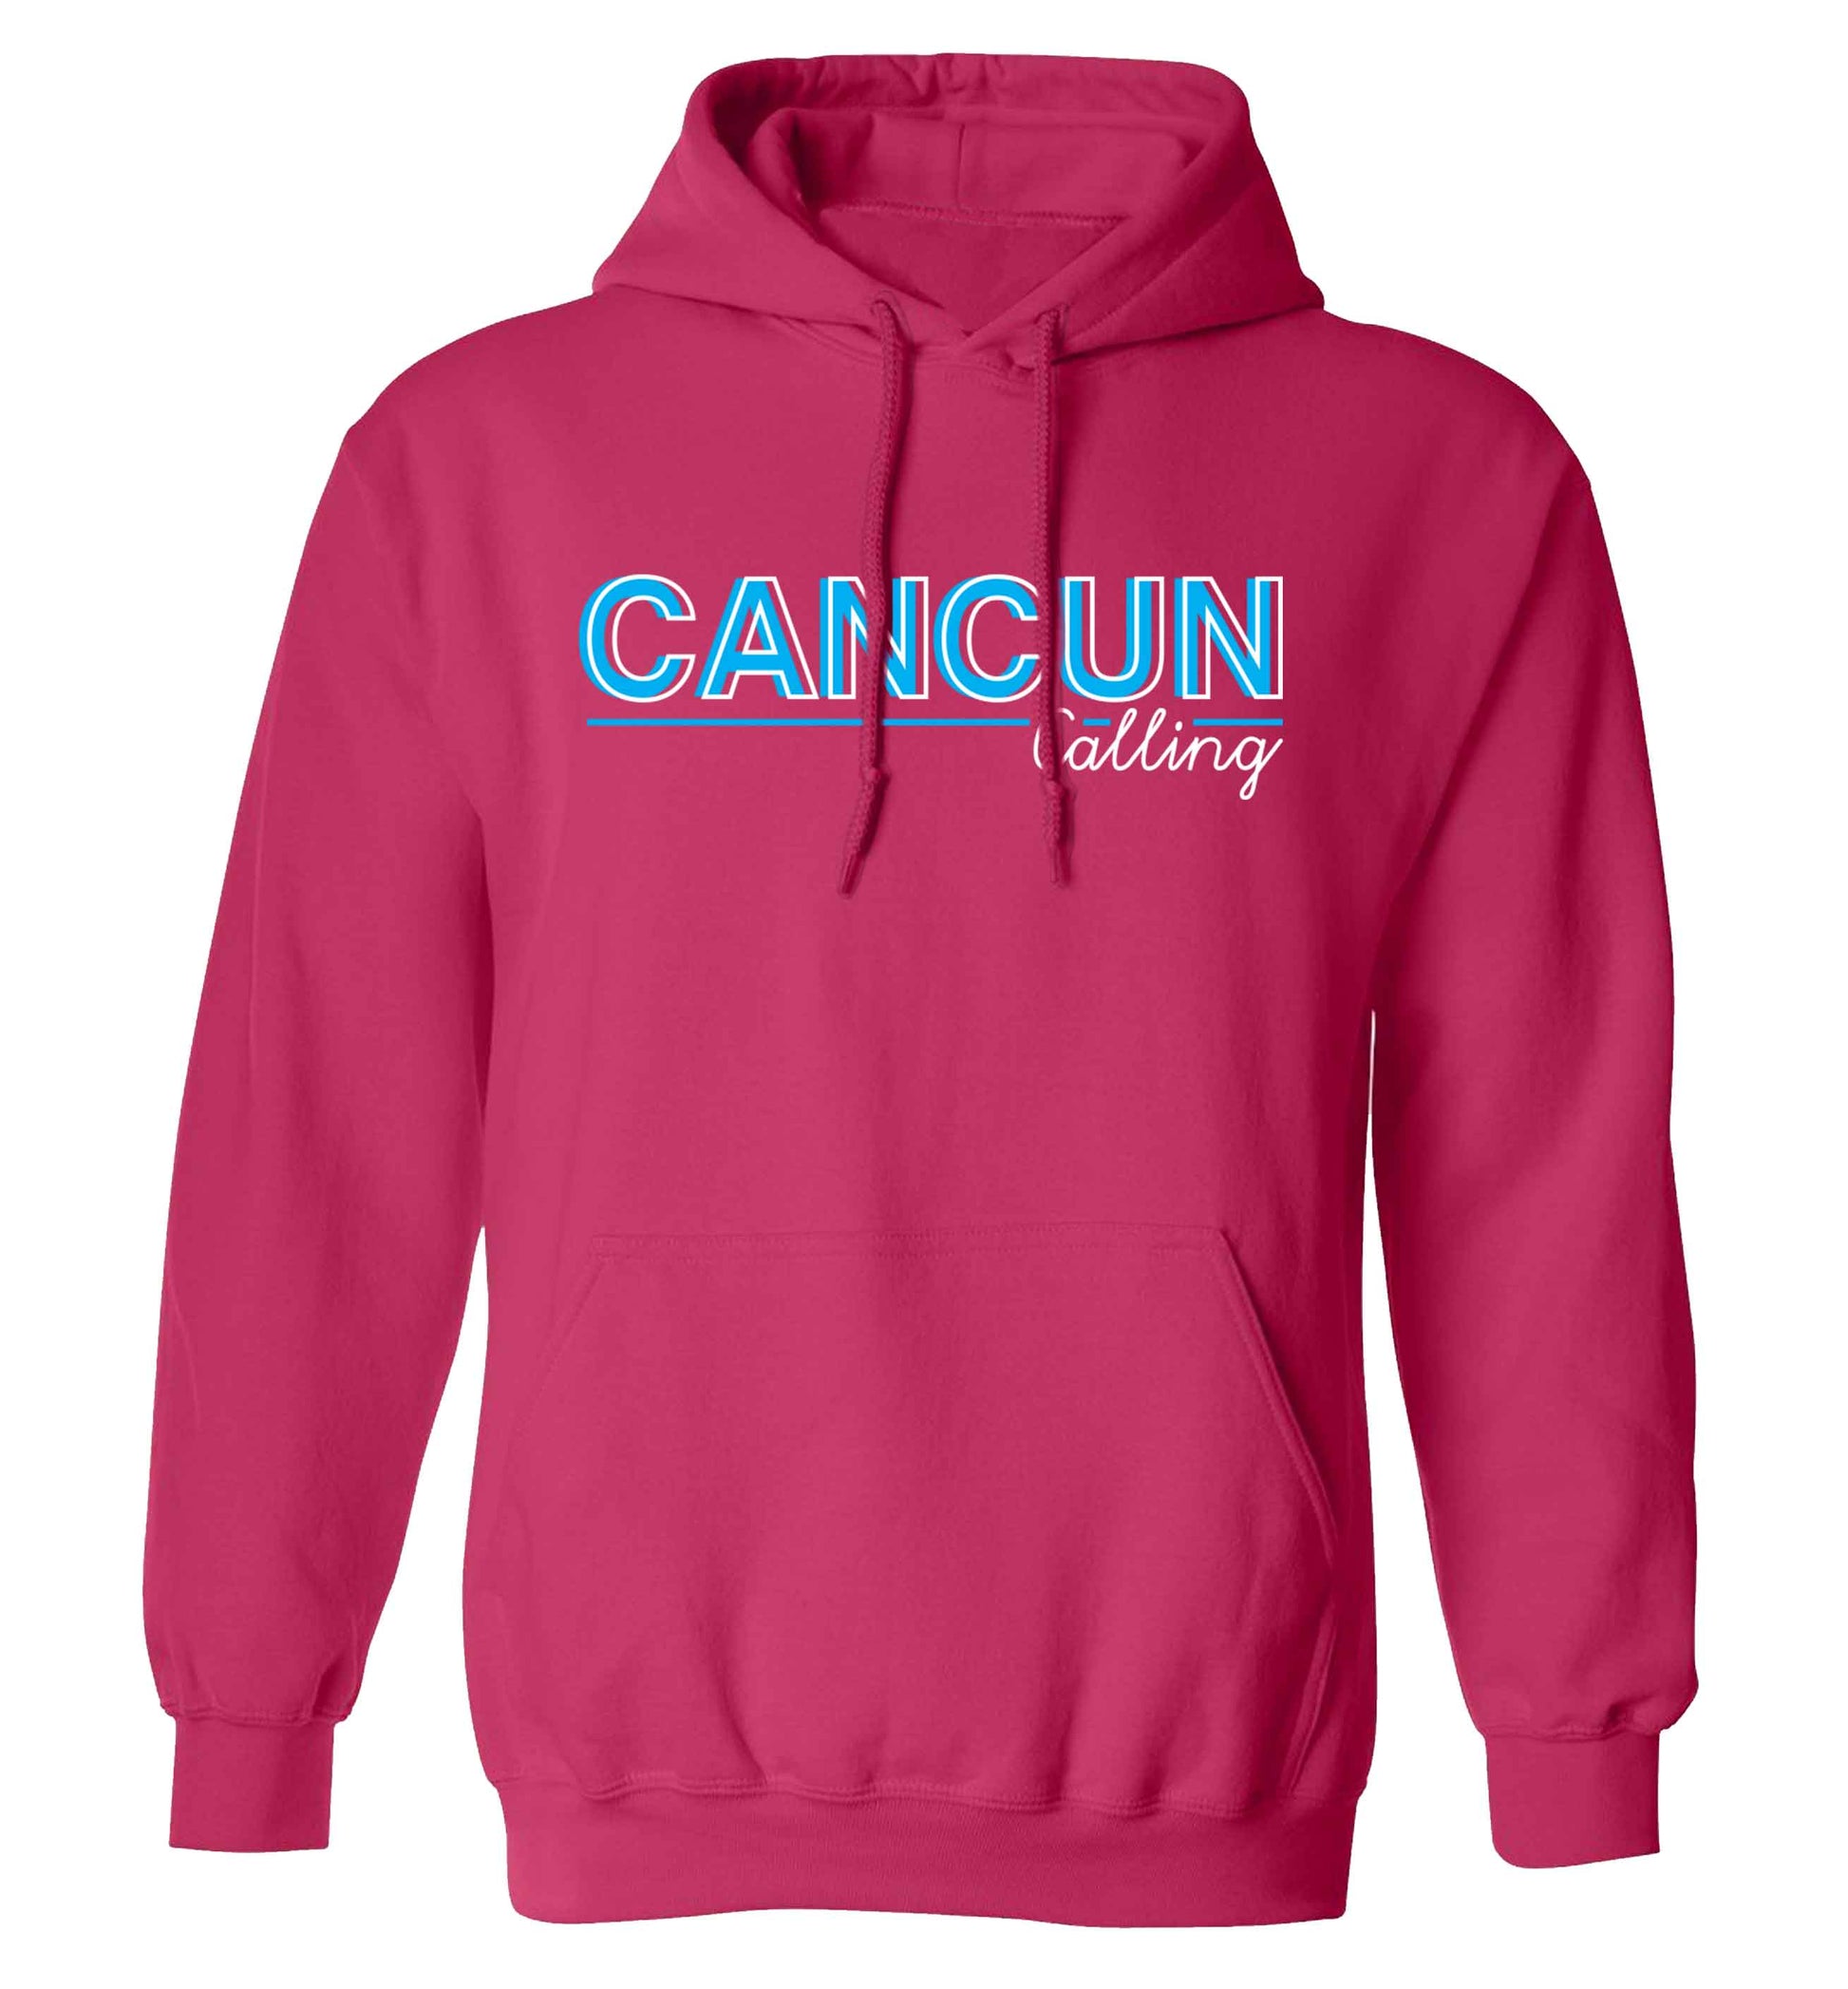 Cancun calling adults unisex pink hoodie 2XL